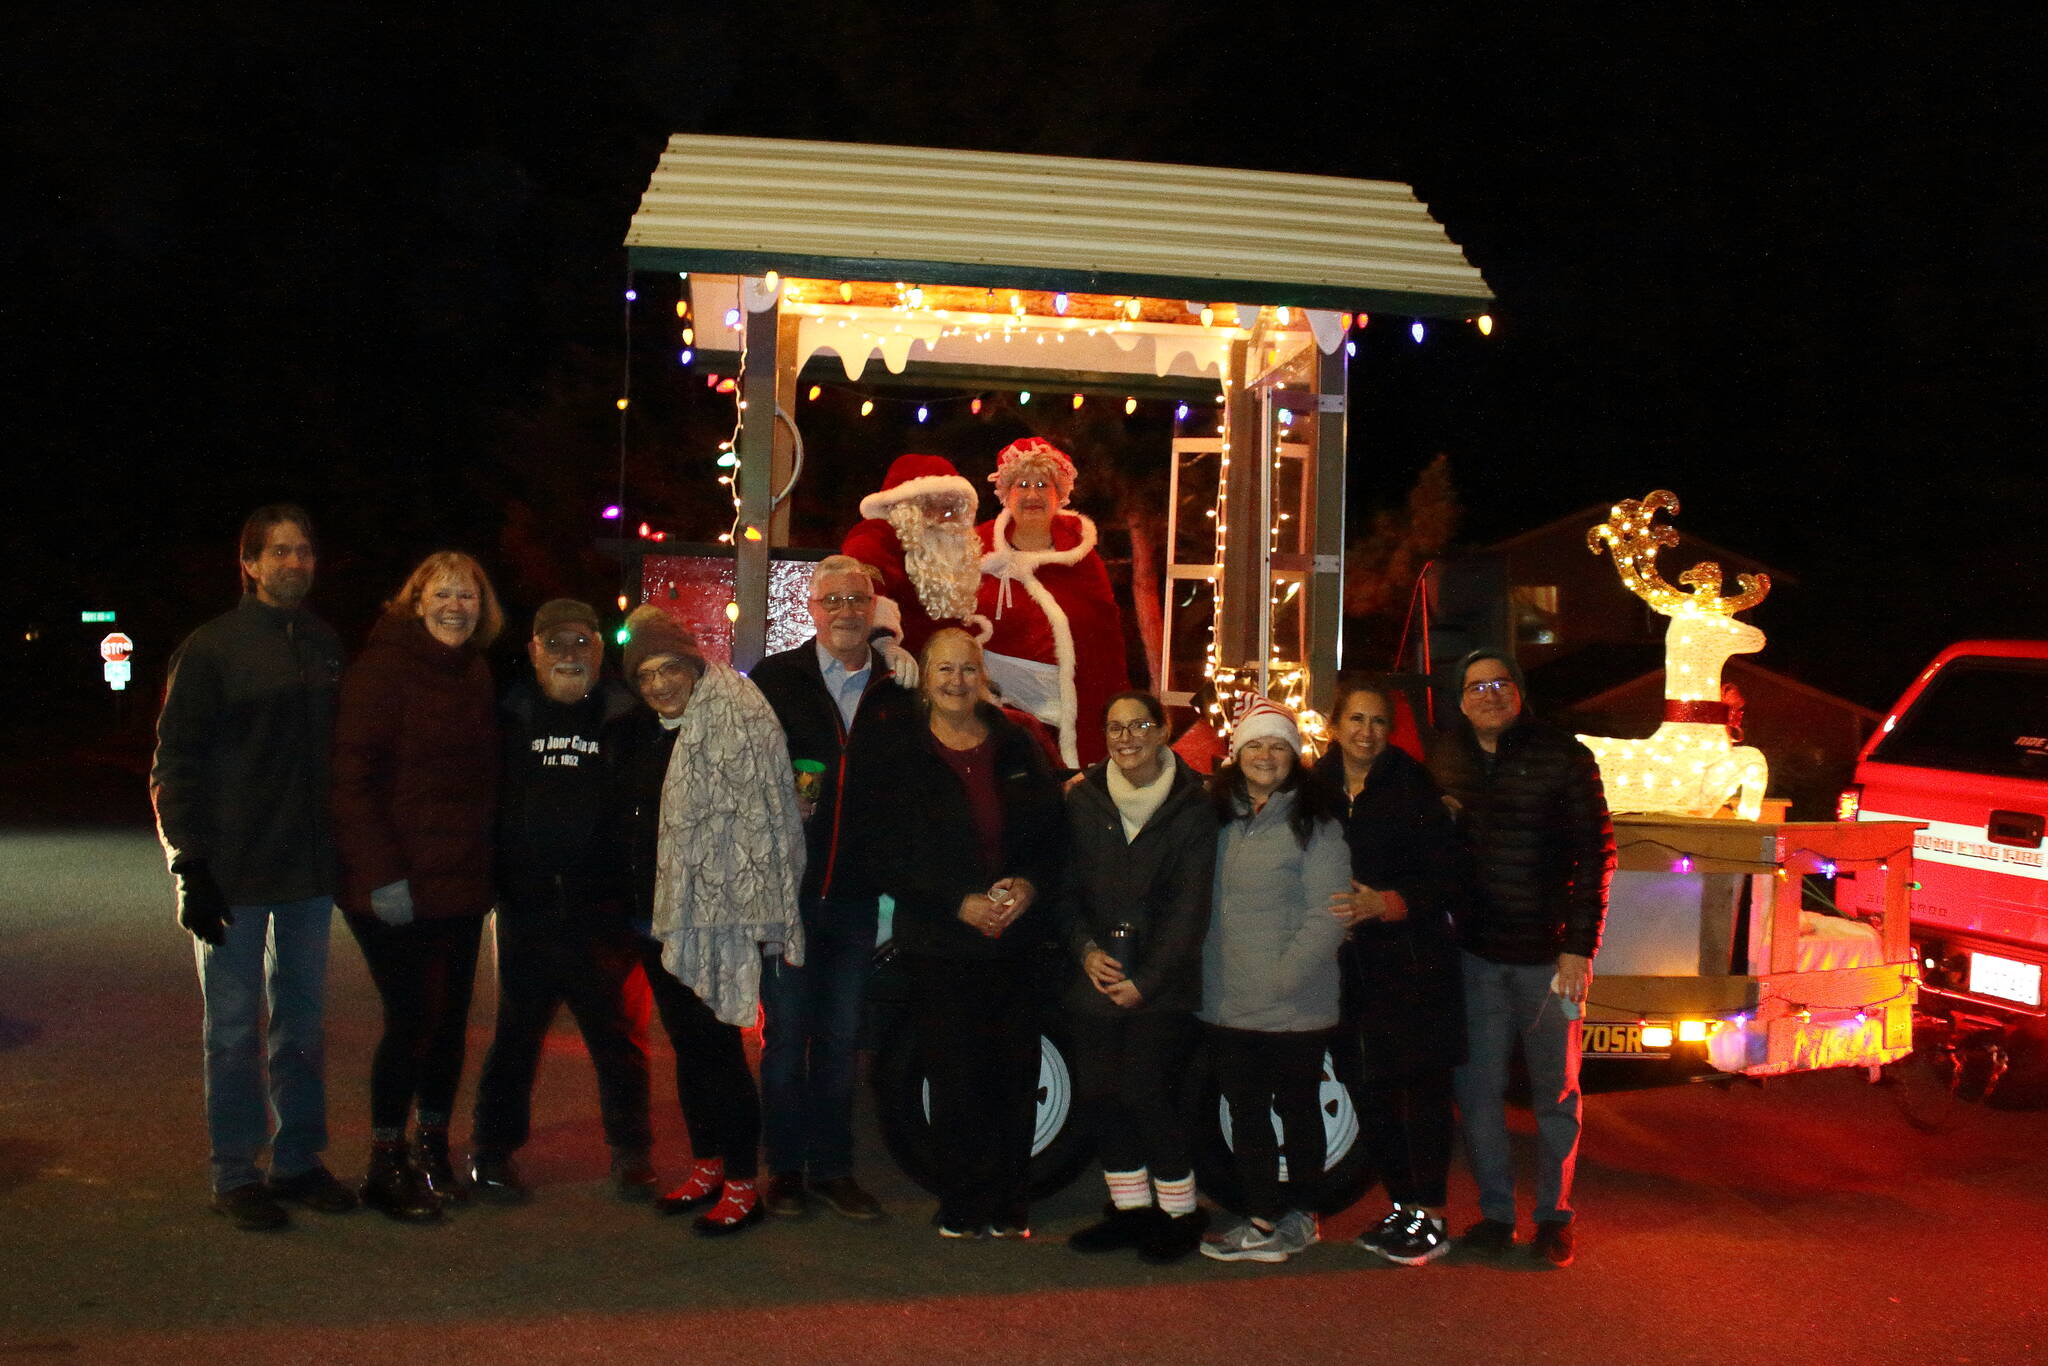 This group of neighbors gathered hundreds of pounds of food donations to hand over during the Santa Parade.